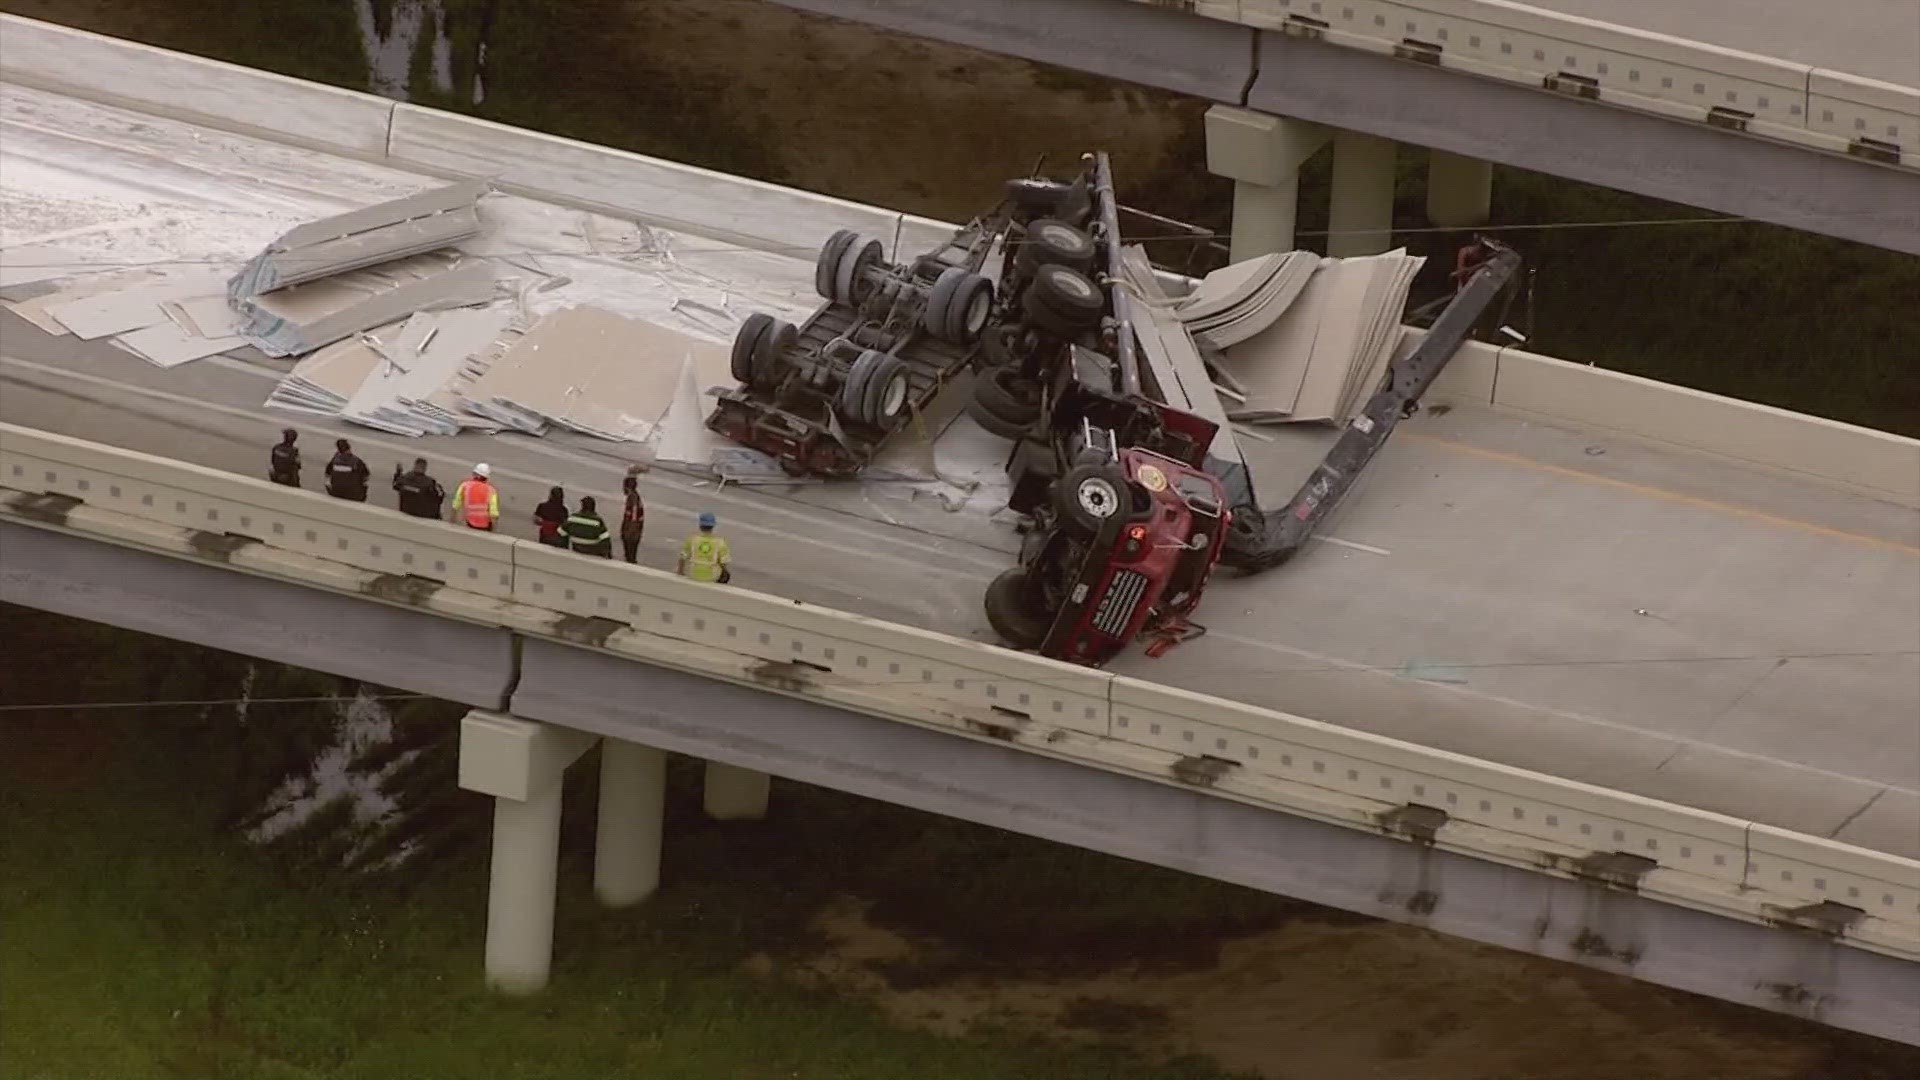 The driver of the overturned 18-wheeler was taken to an area hospital to be treated for injuries.